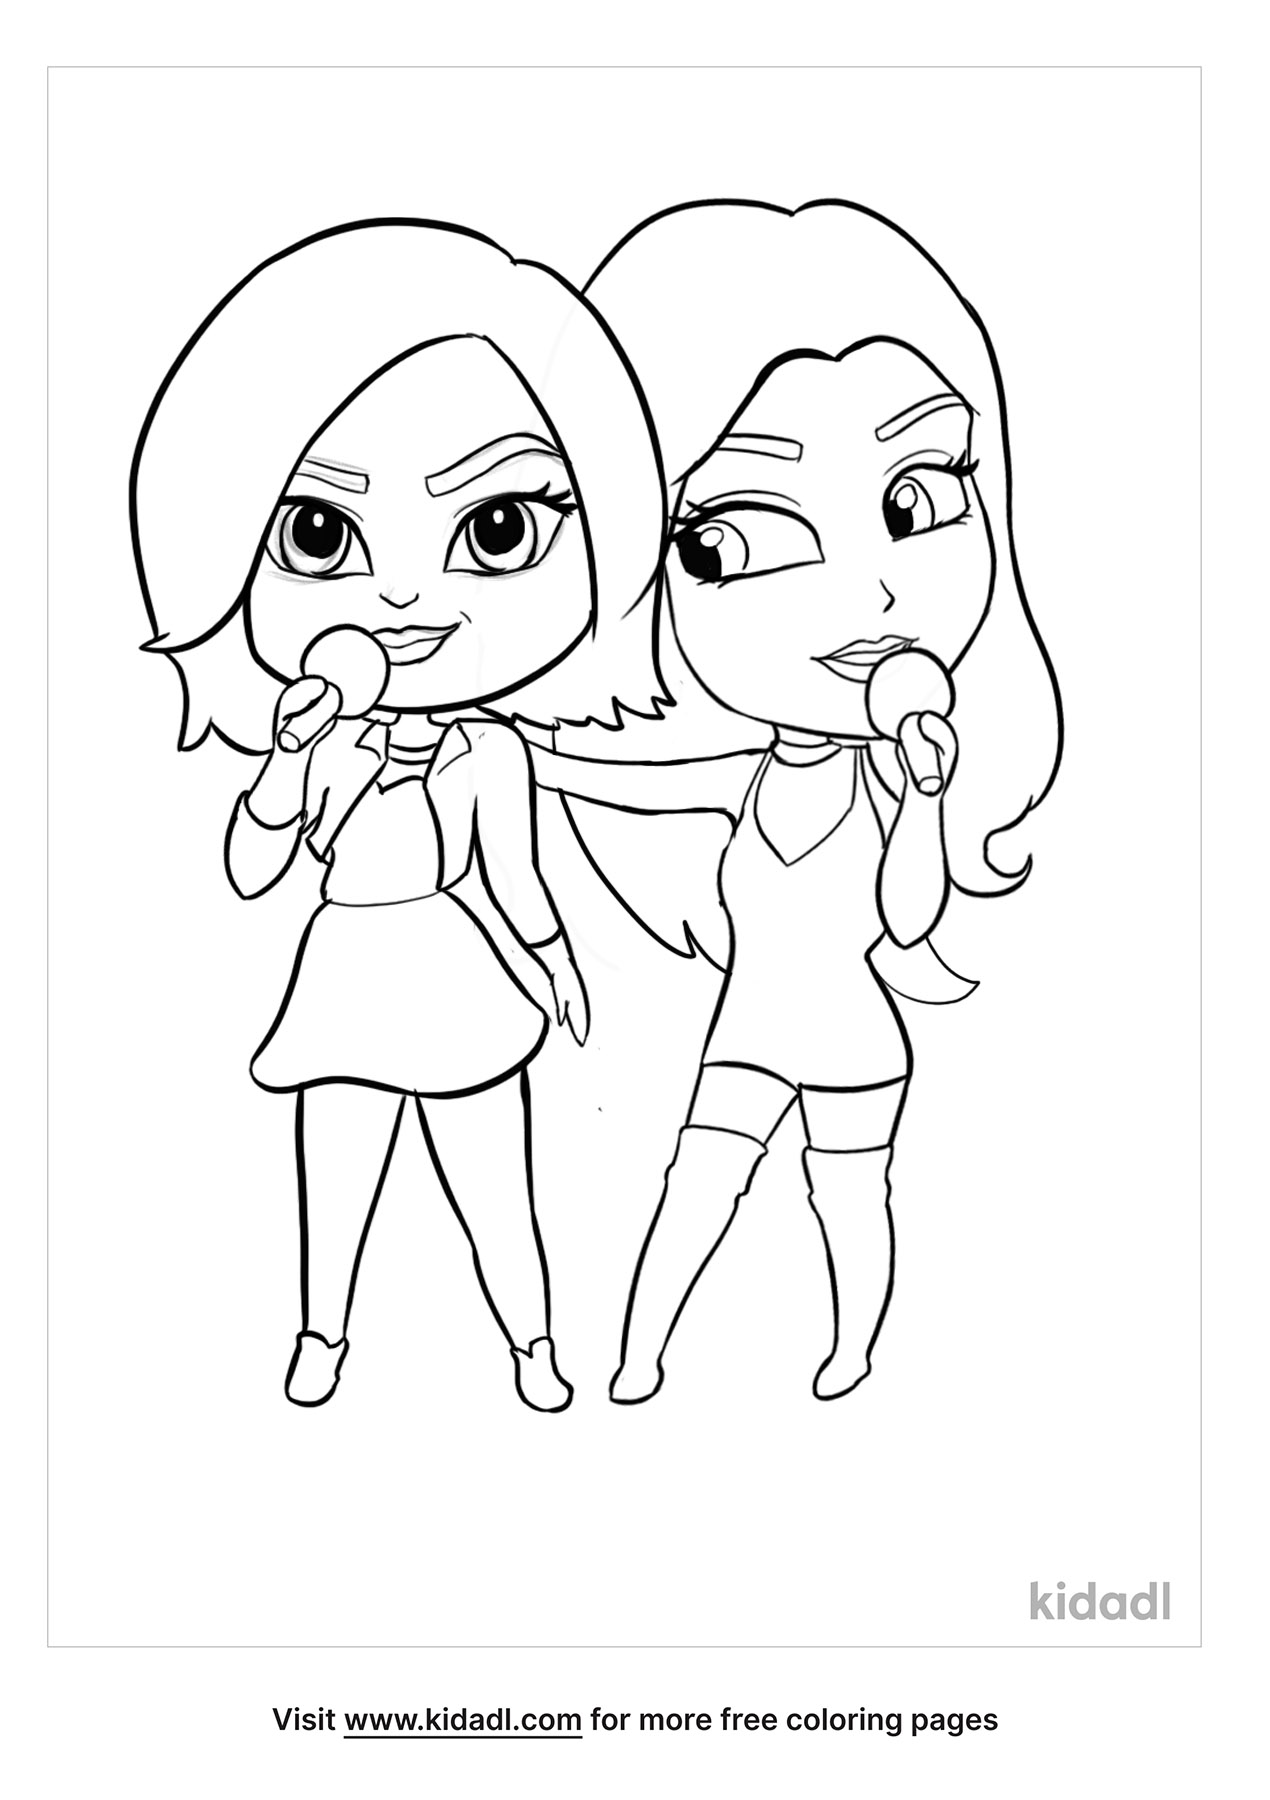 Selena Gomez And Demi Lovato Coloring Pages | Free People Coloring Pages |  Kidadl